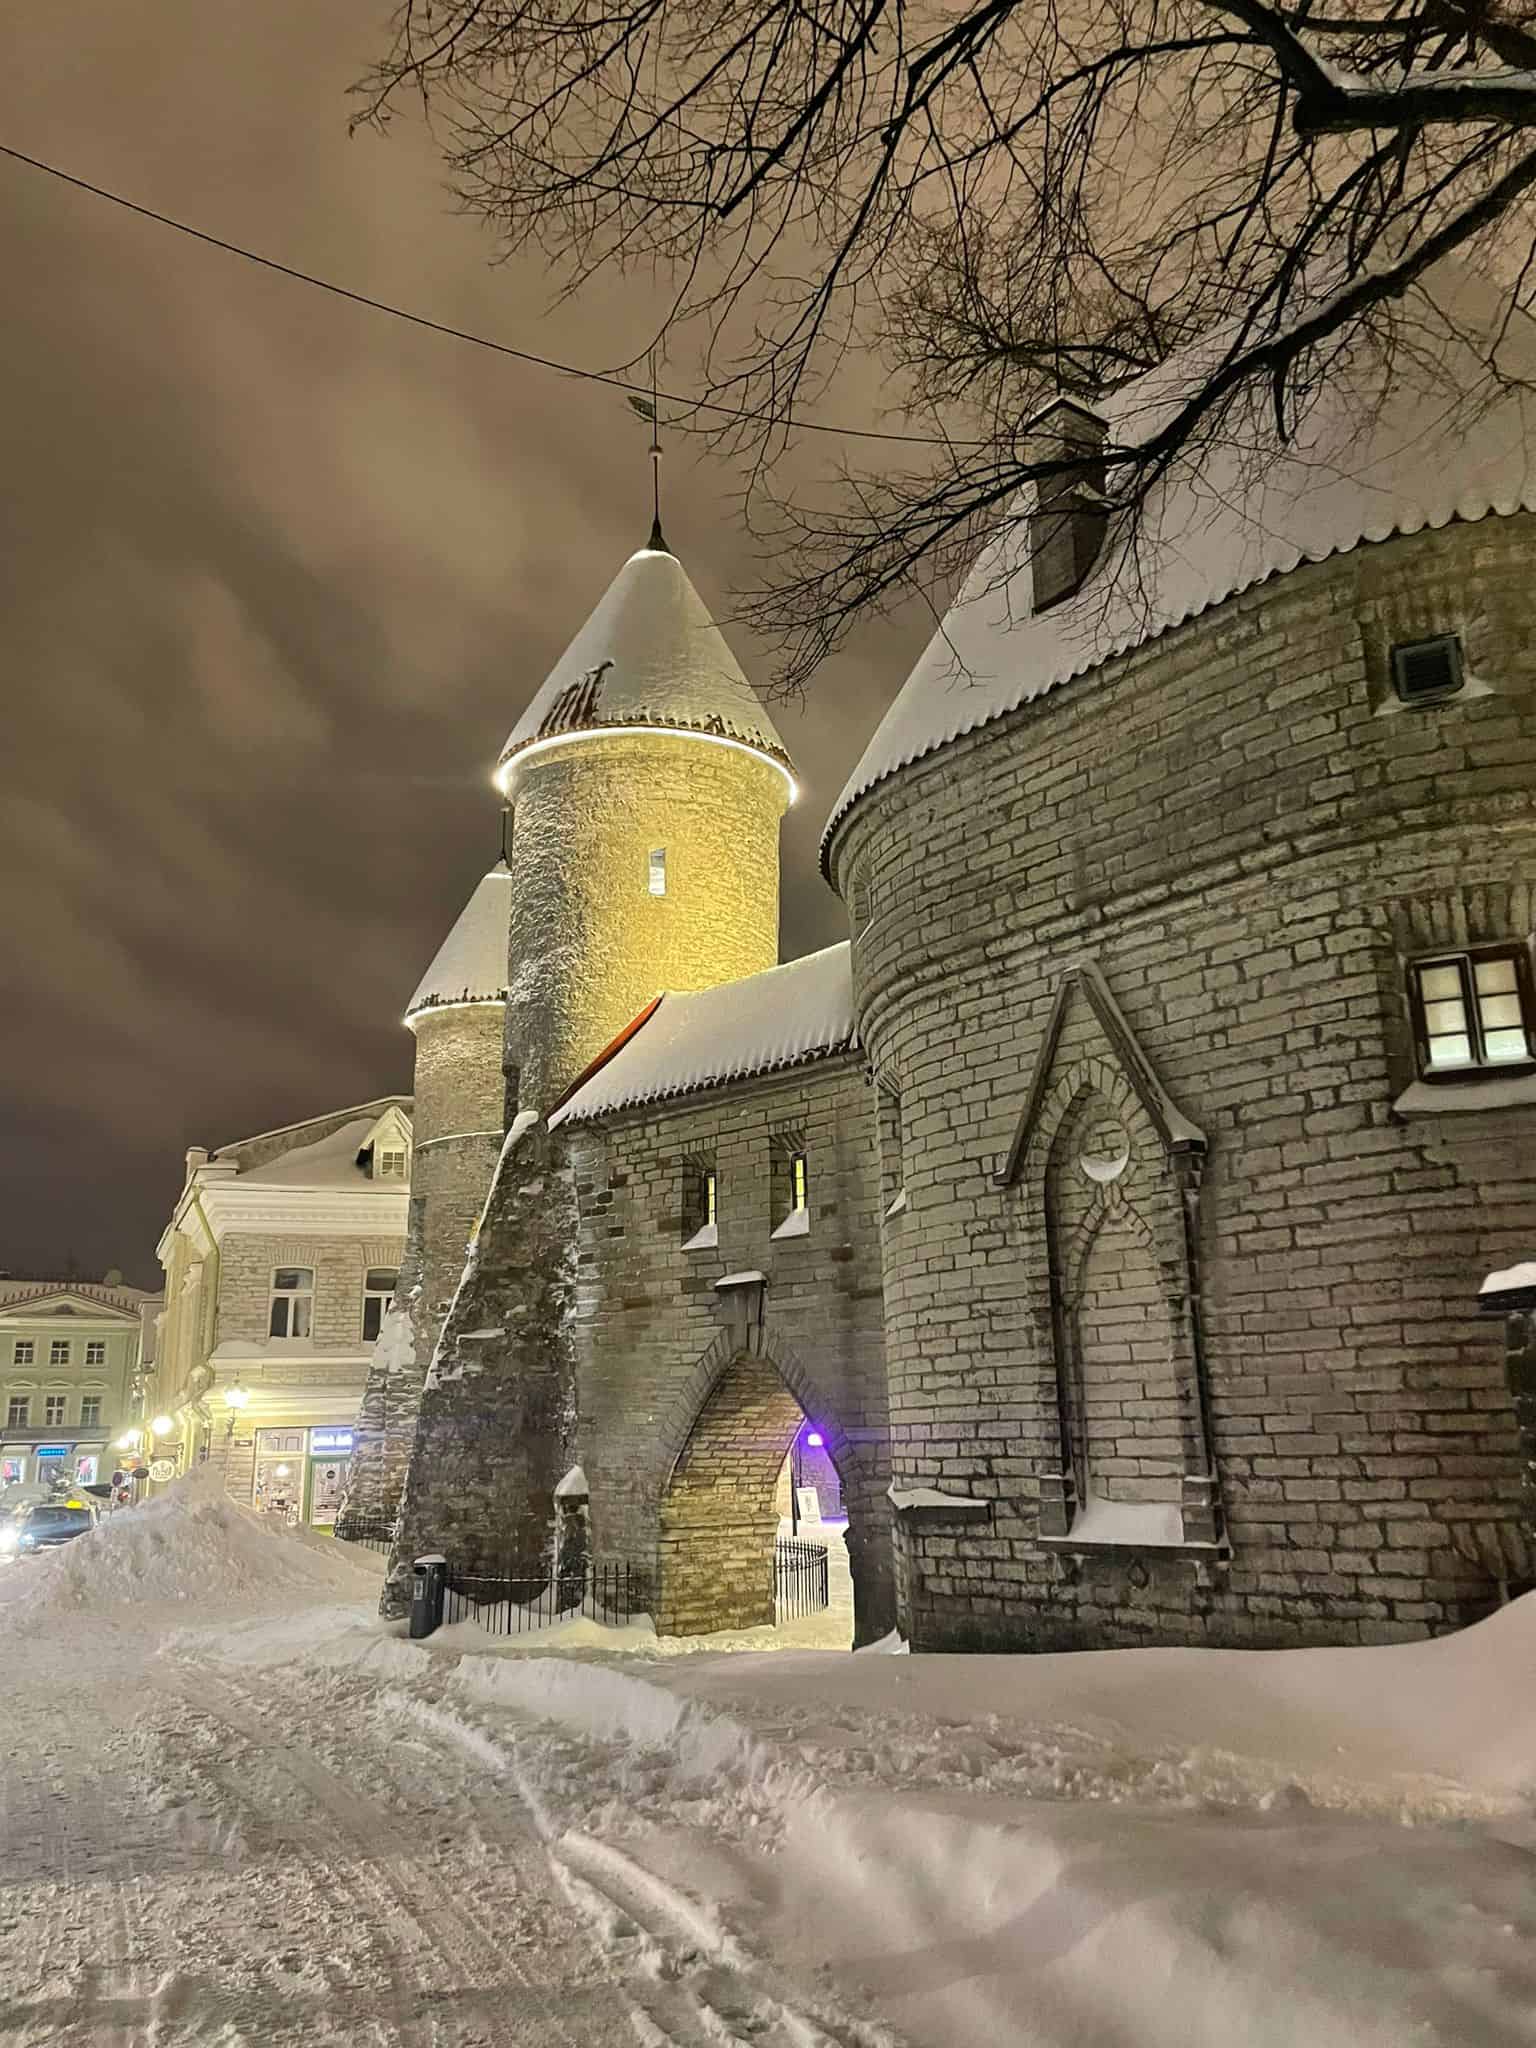 Snow-covered turrets in the Old Town of Tallinn, Estonia